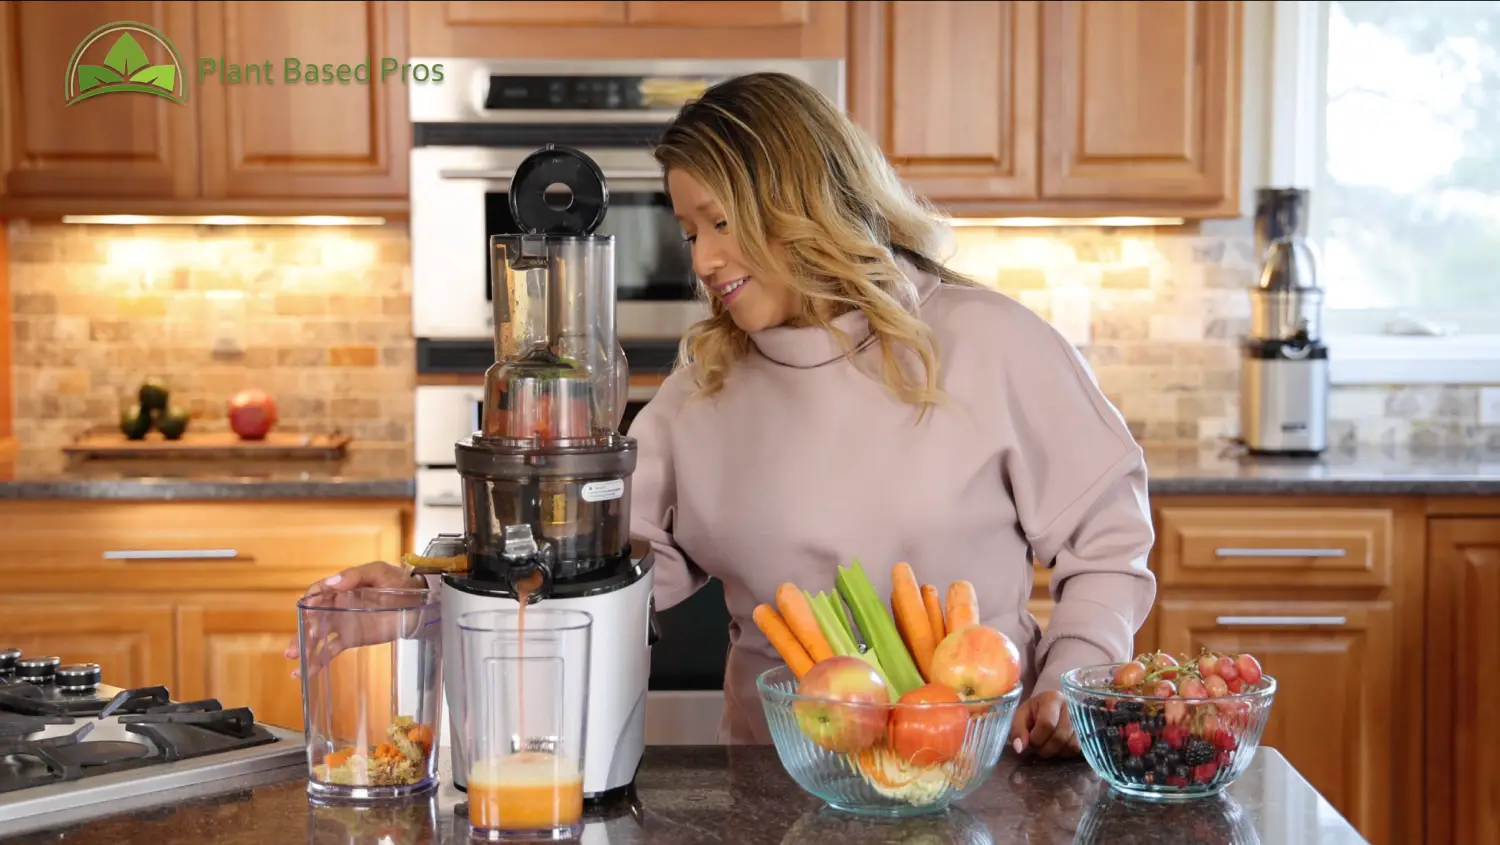 Kuvings REVO830 Juicer Review - Plant Based Pros